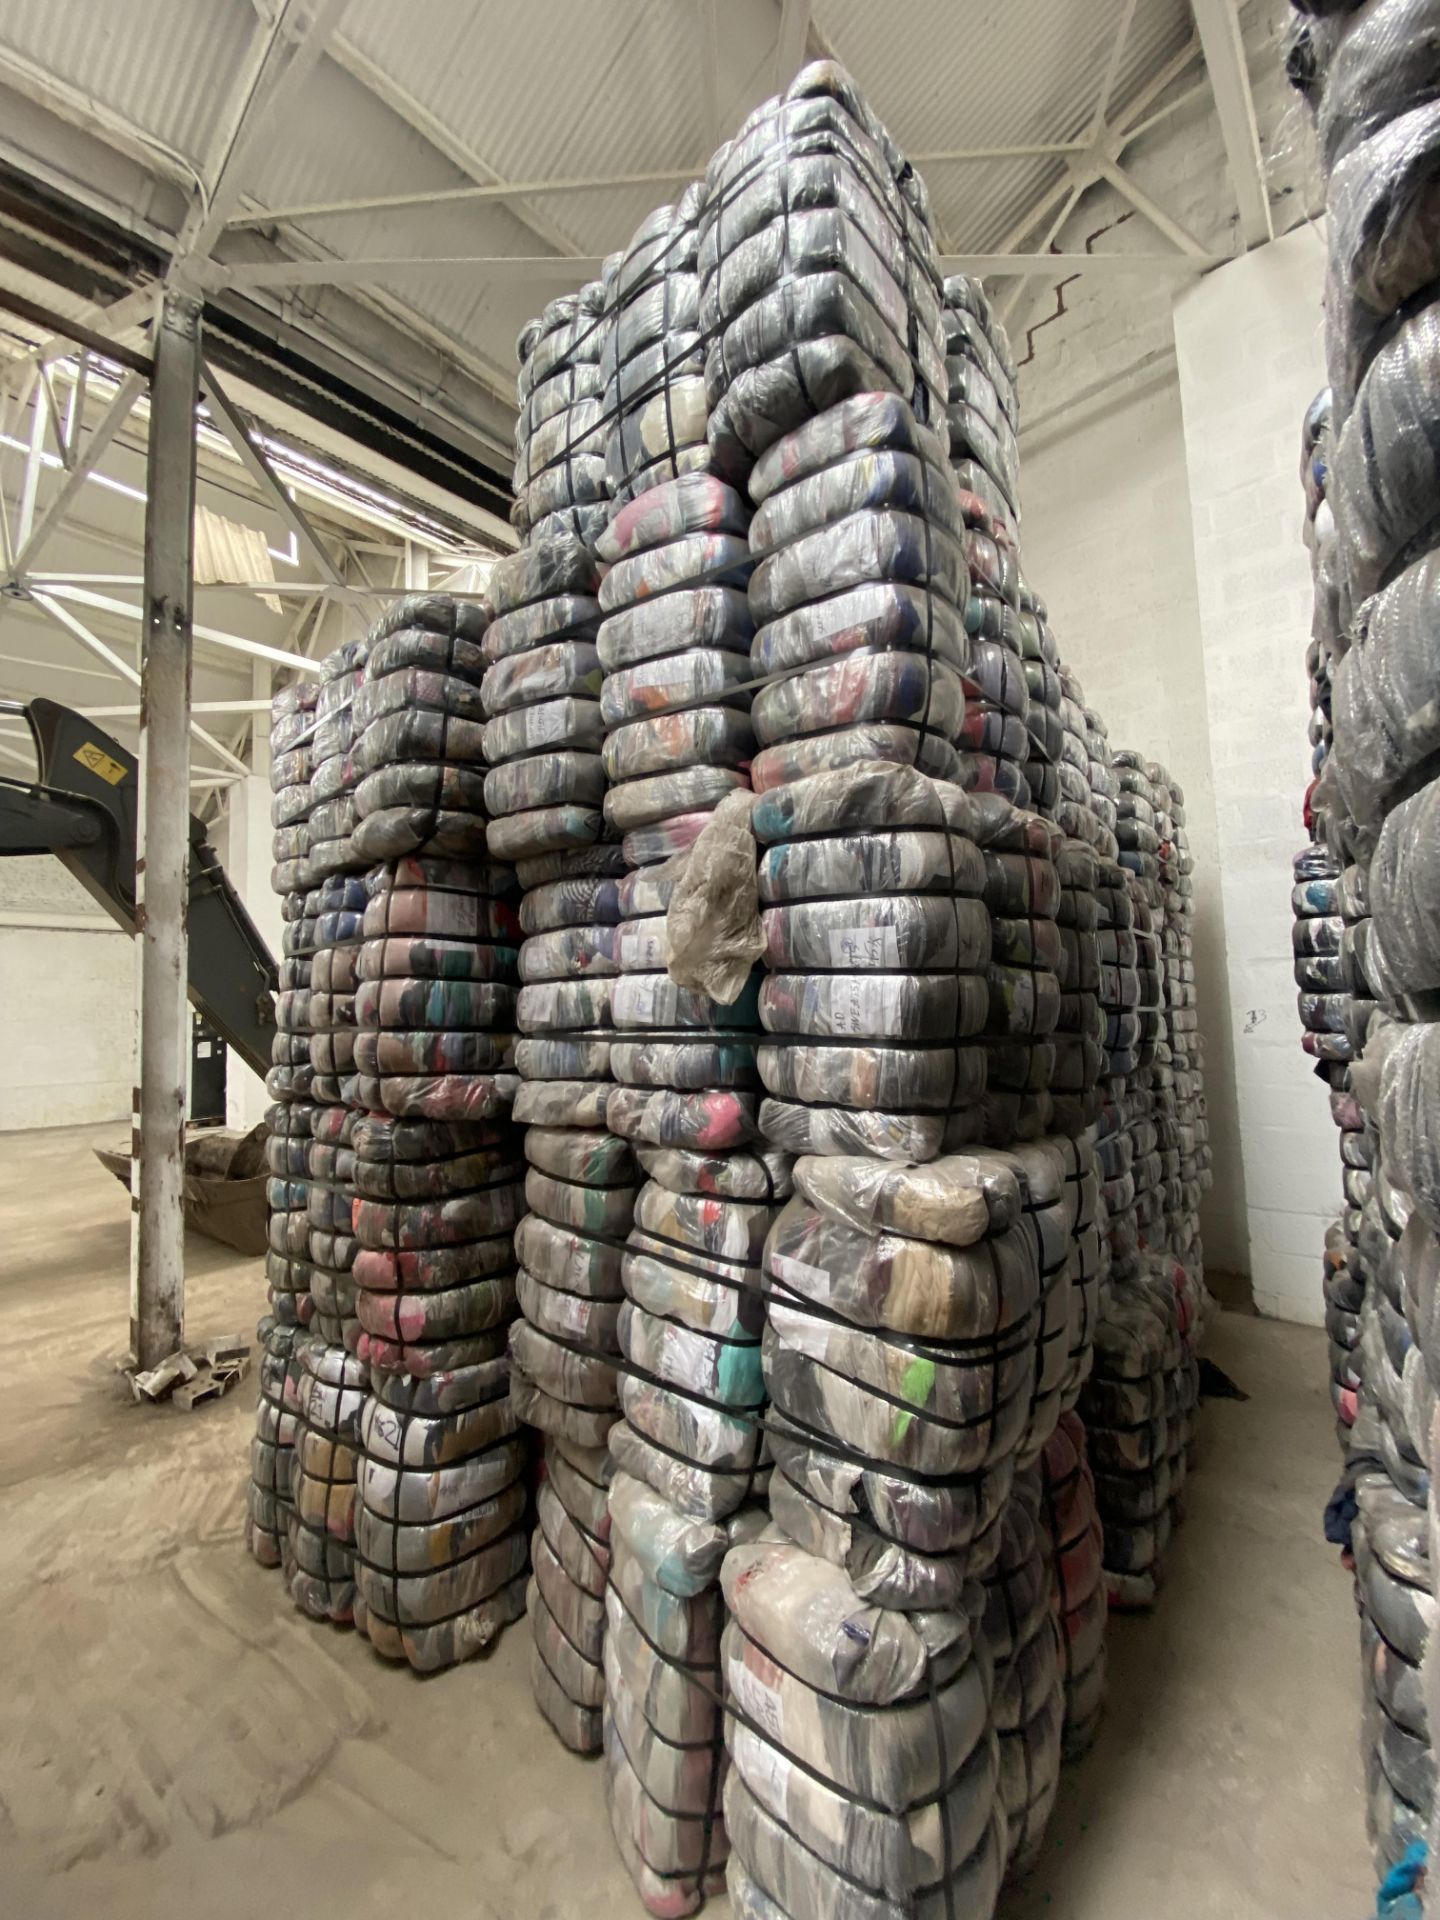 APPROX 211 BALES (9495KG) RECYCLABLE WASTE TEXTILES, understood to comprise: Three bale x 45kg - Image 8 of 8